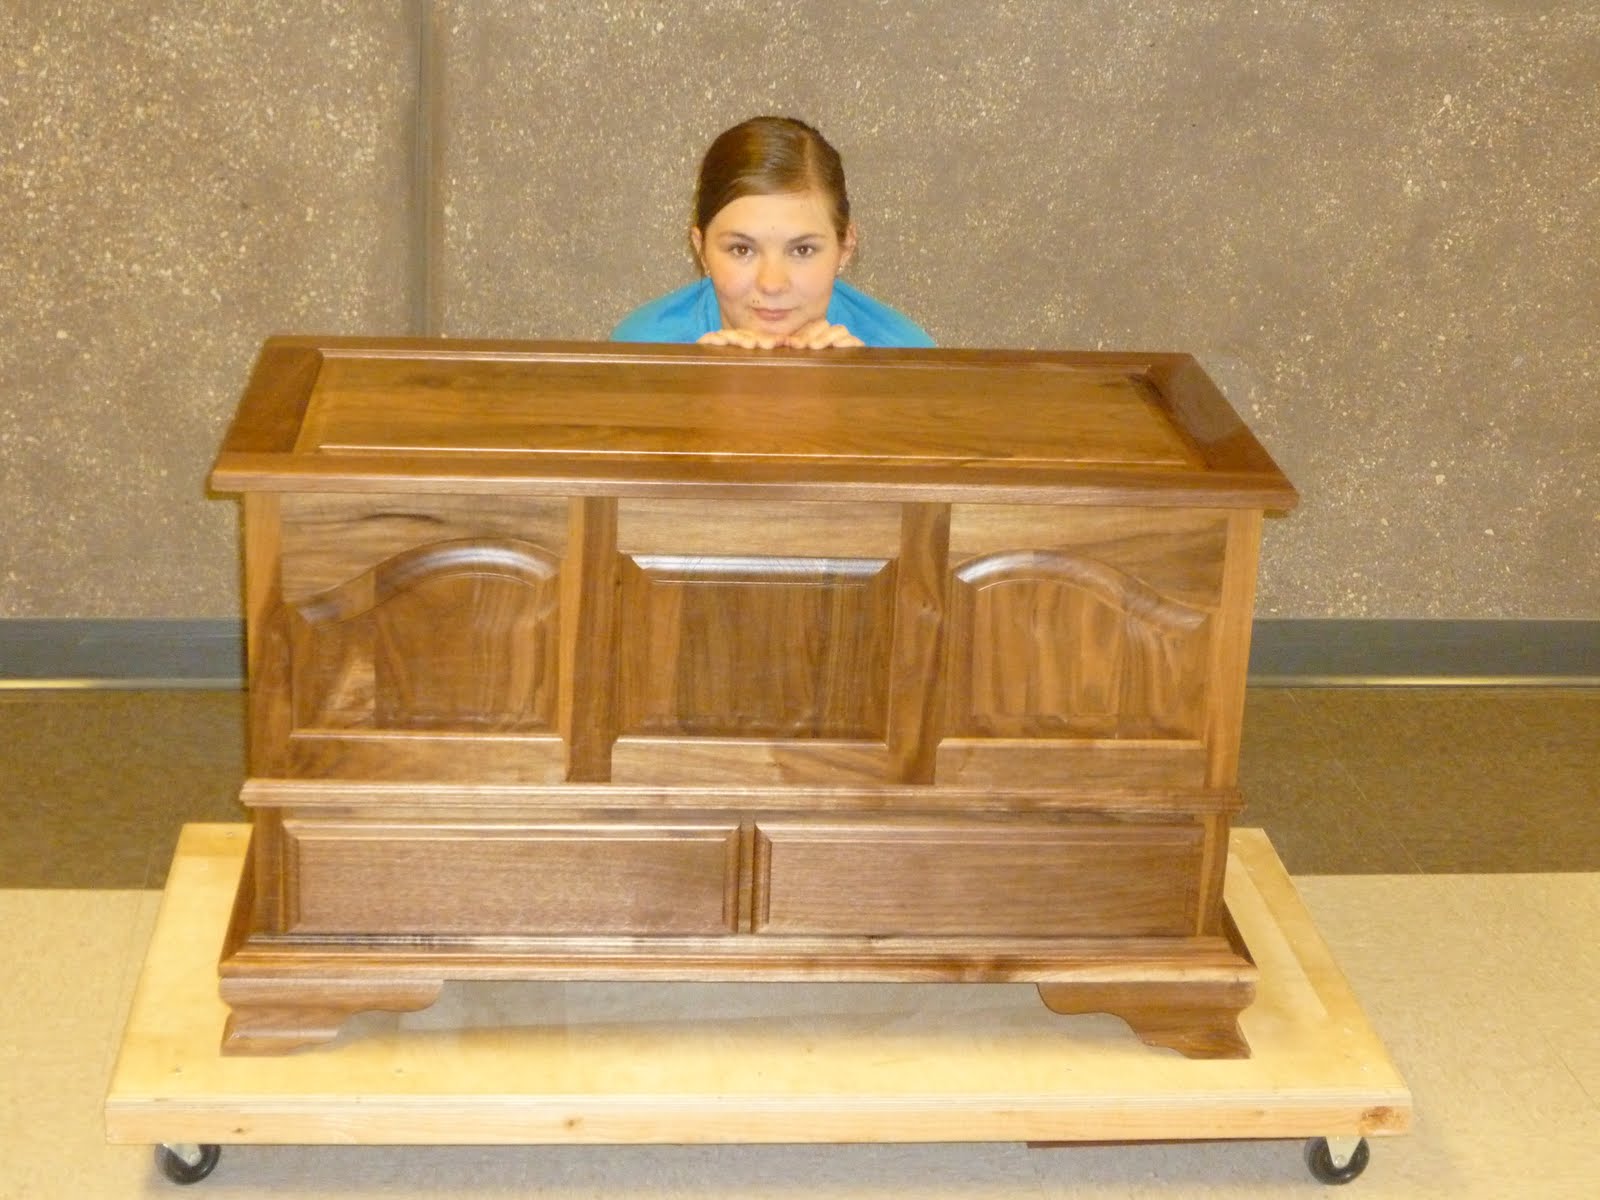 Woodwork Woodworking Projects For Middle School Students ...